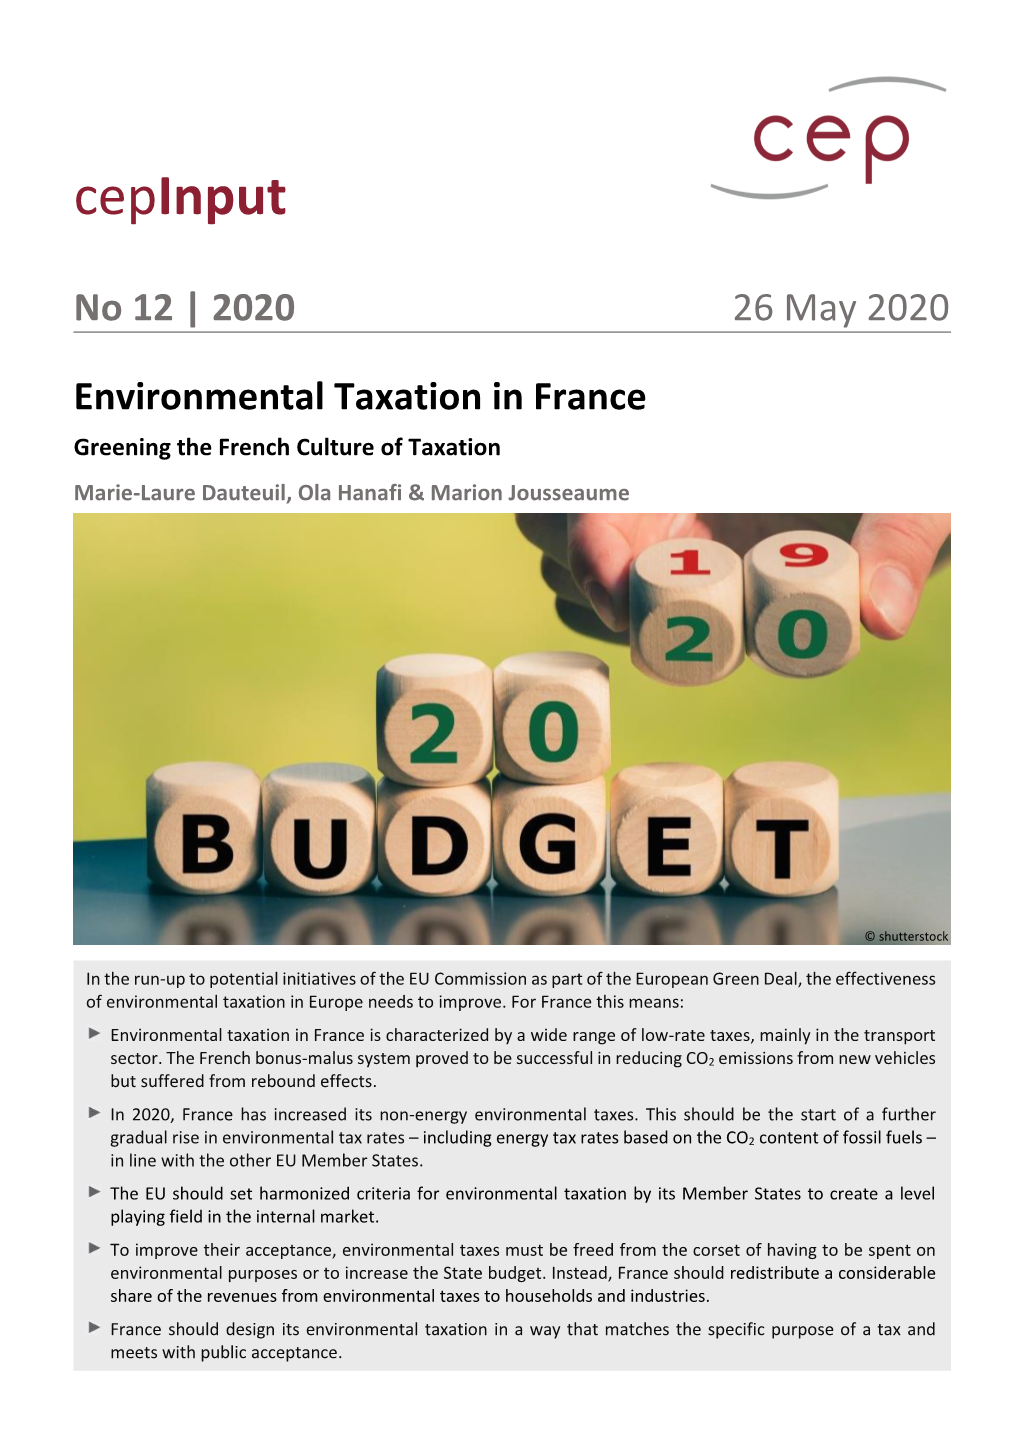 Environmental Taxation in France Greening the French Culture of Taxation Marie-Laure Dauteuil, Ola Hanafi & Marion Jousseaume